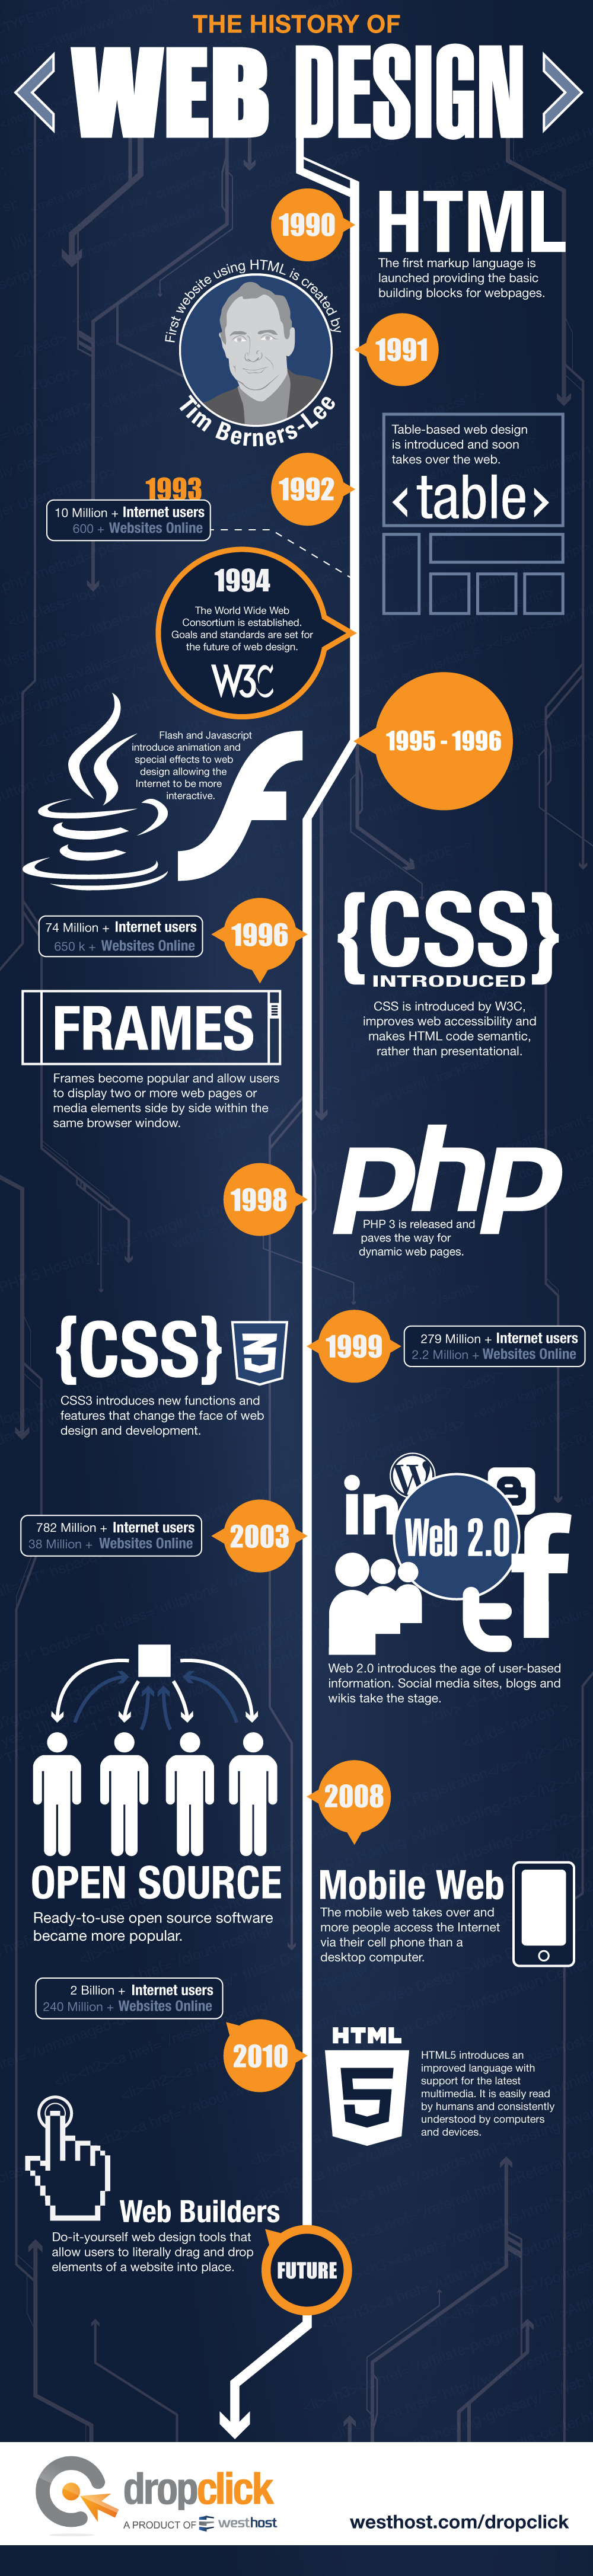 the-history-of-web-design